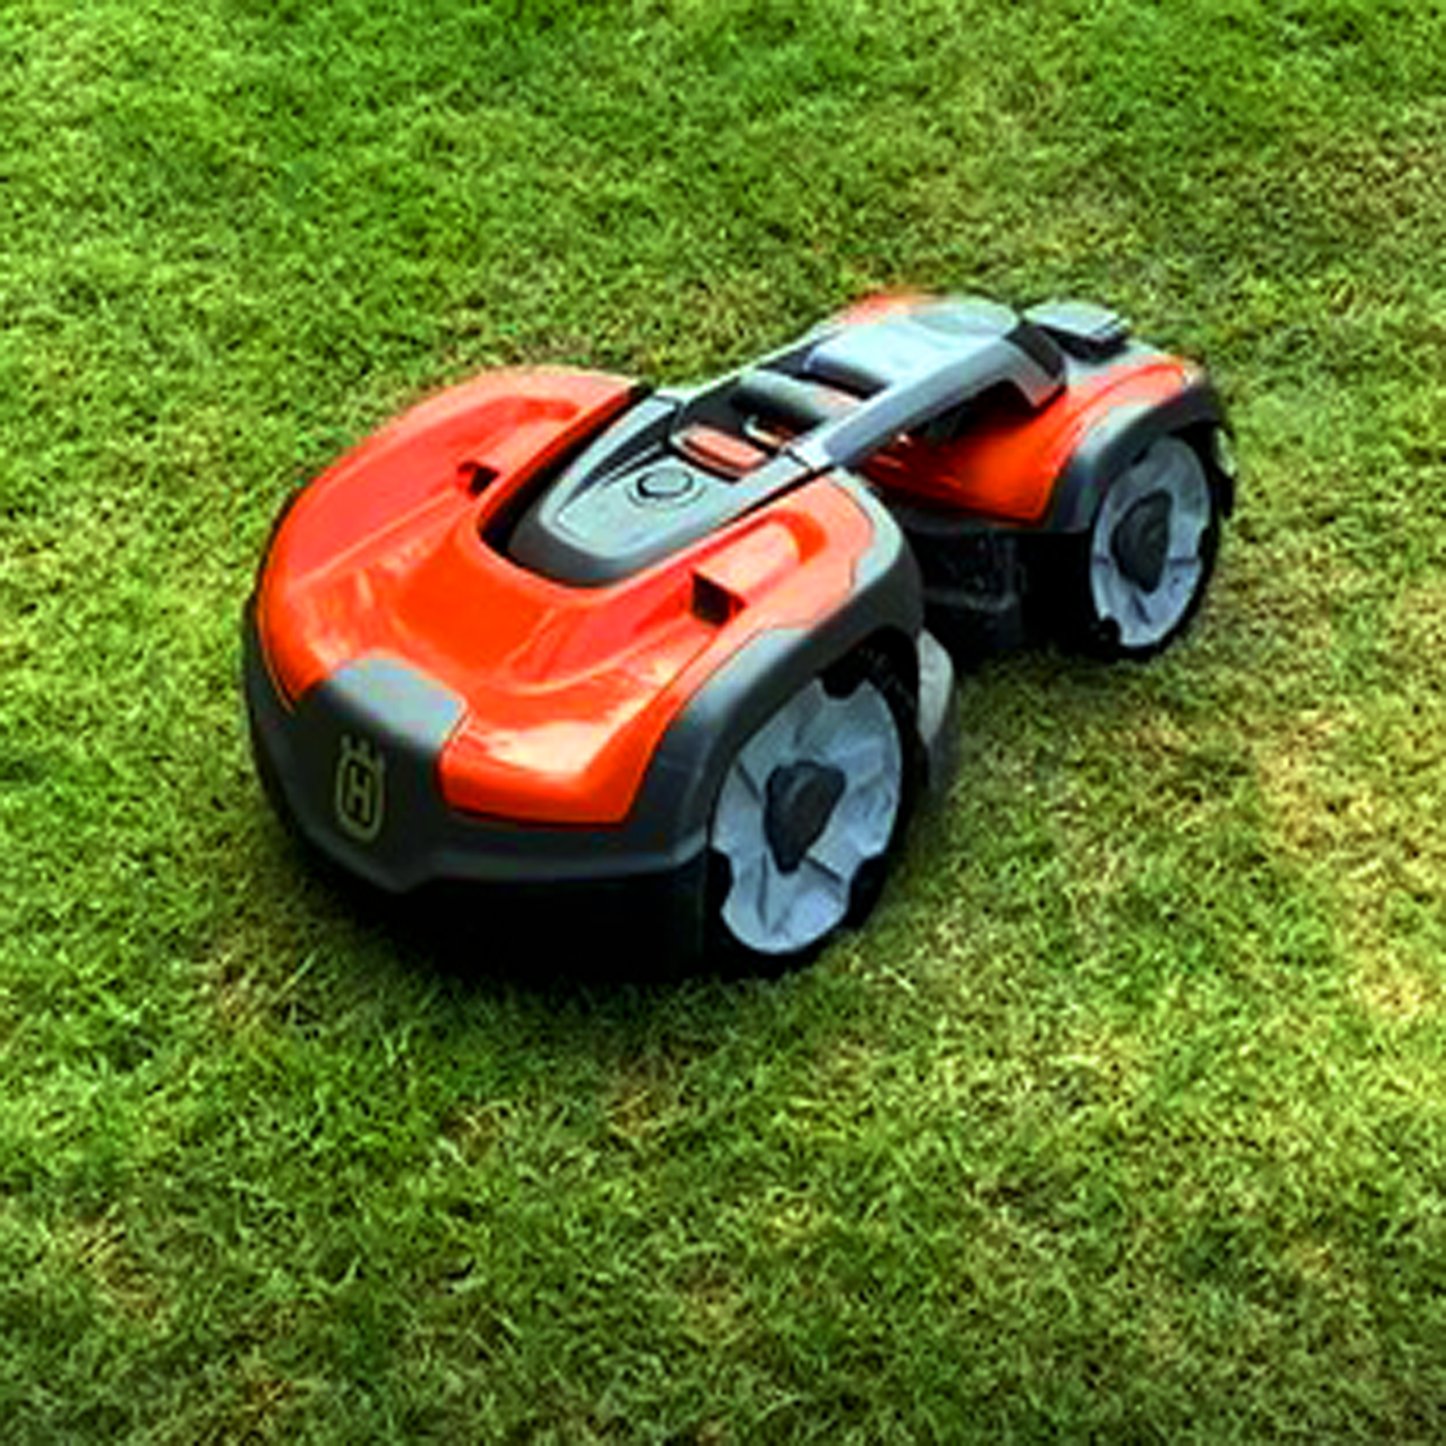 4 Ways Robotic Lawnmowers Improve Your Lawn and Your Life